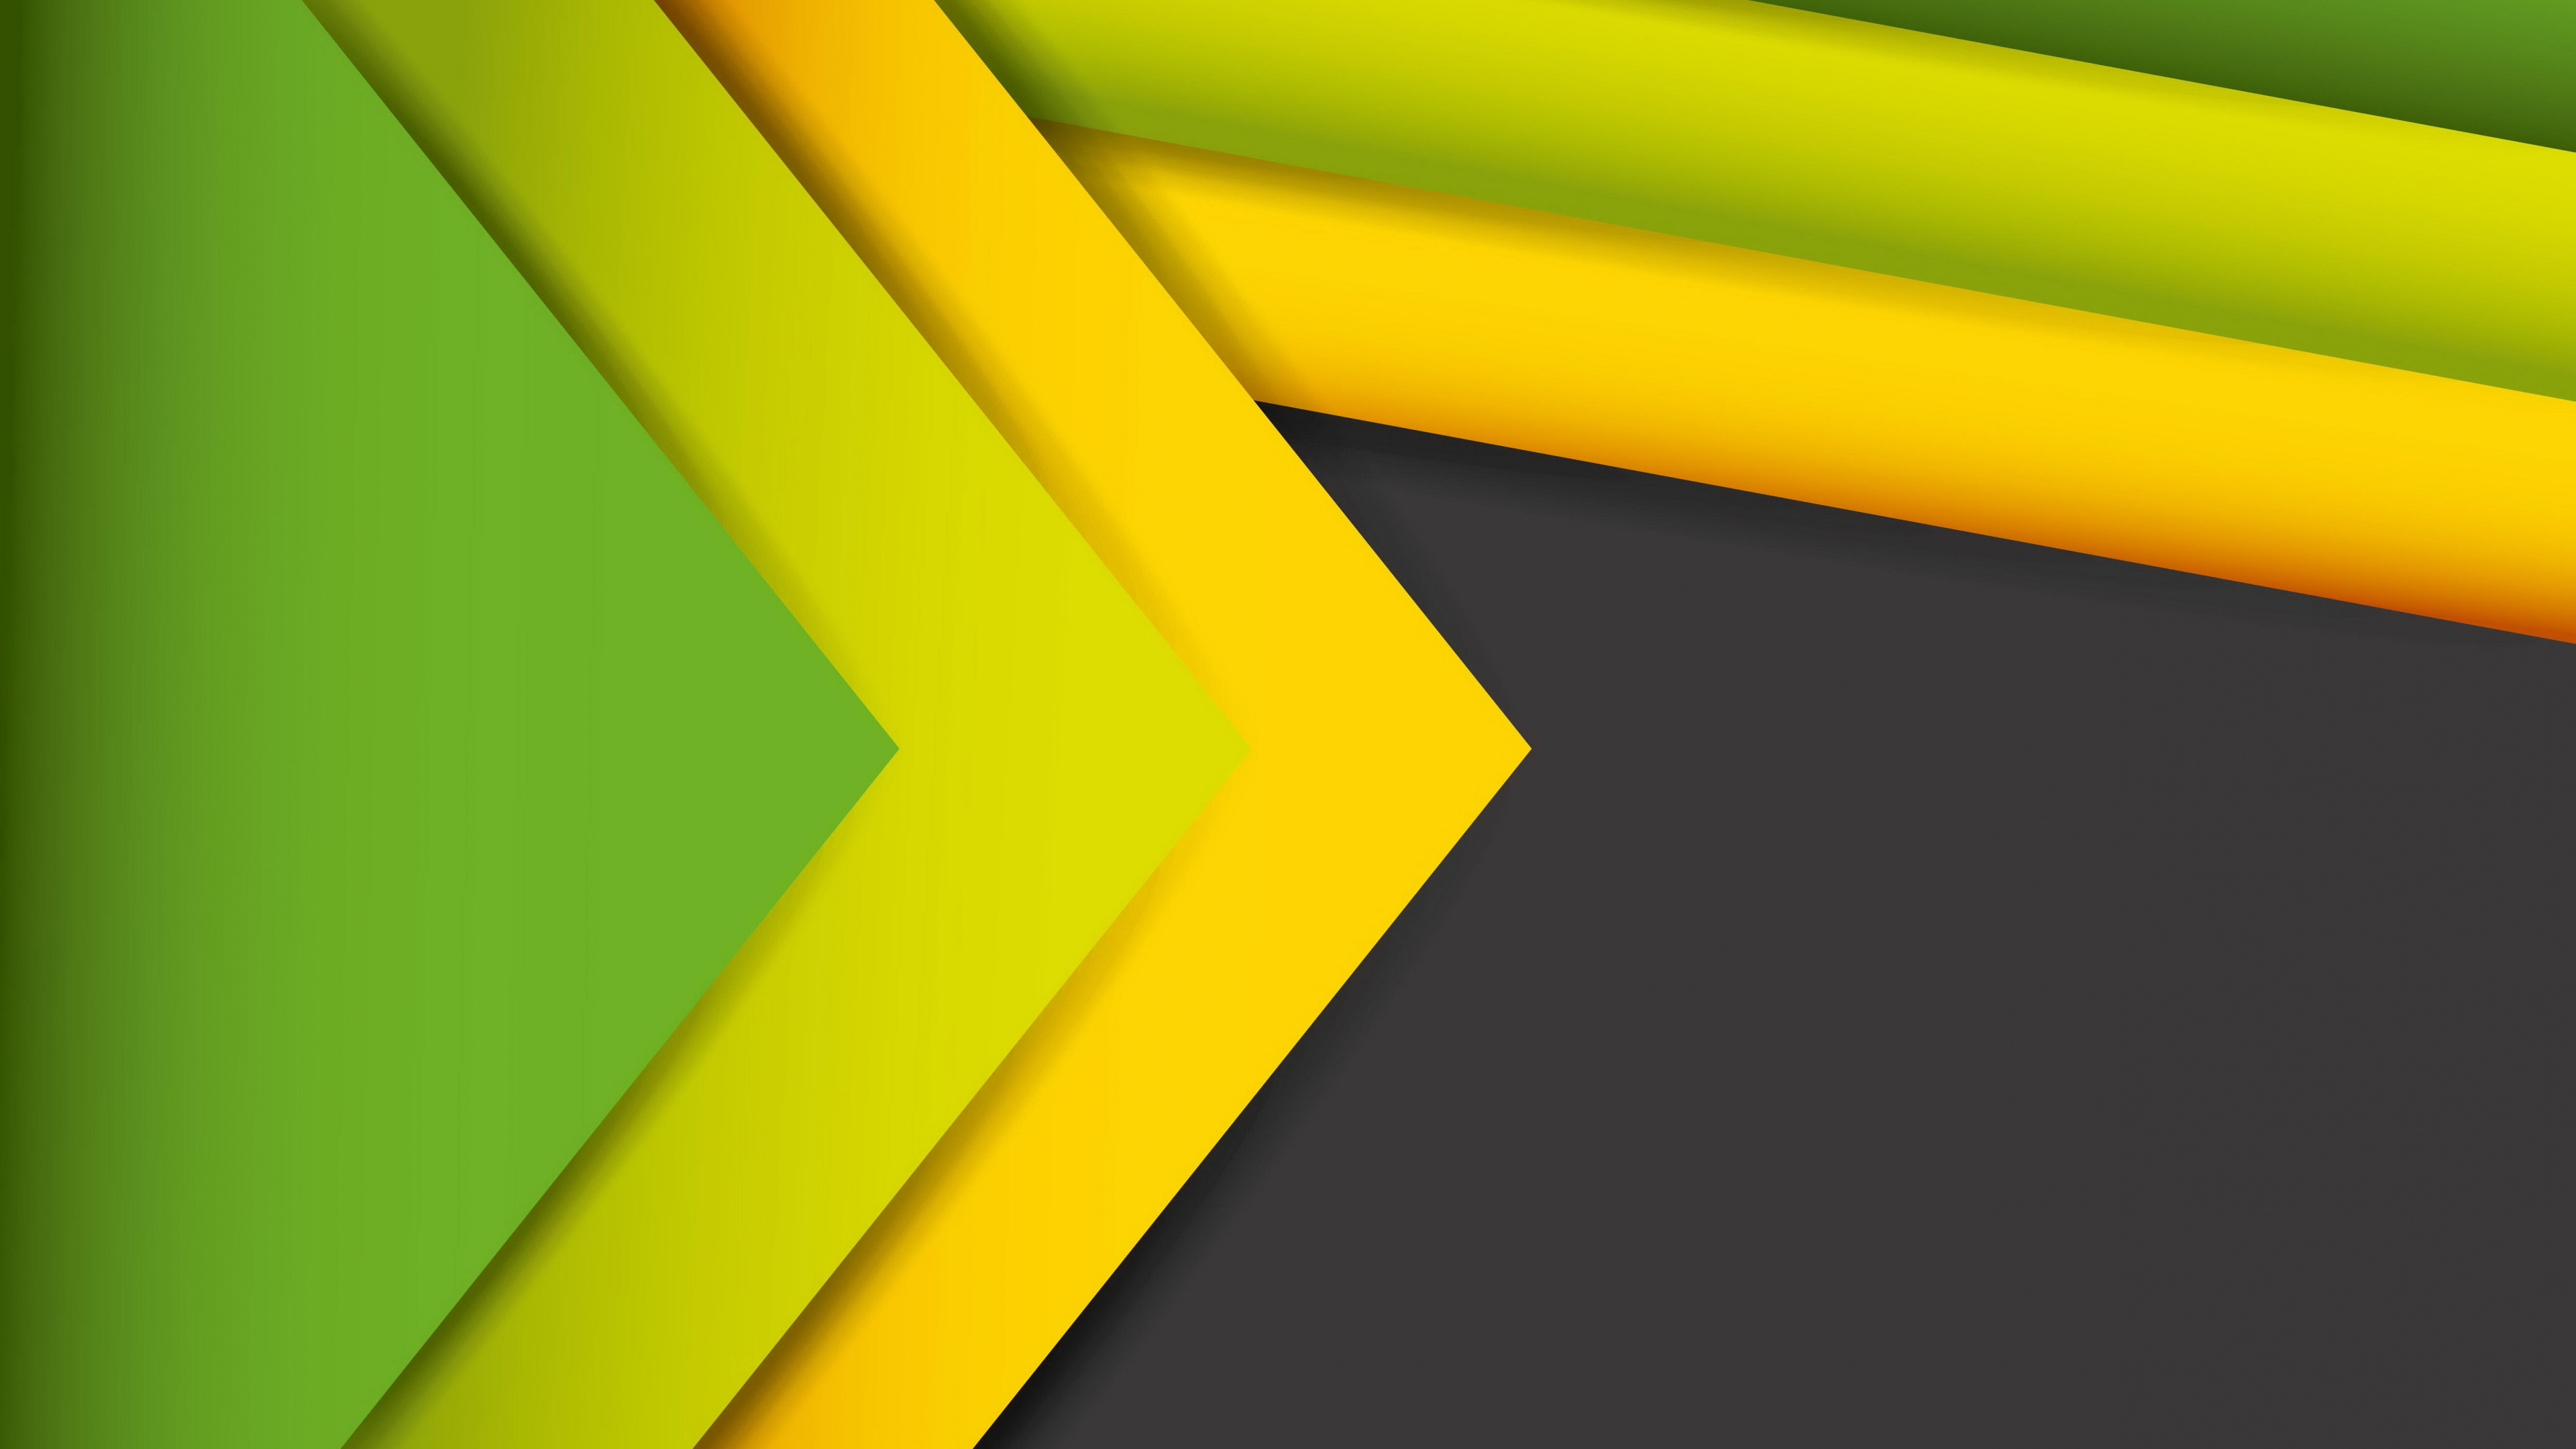 Yellow and Green Triangle Illustration. Wallpaper in 3840x2160 Resolution